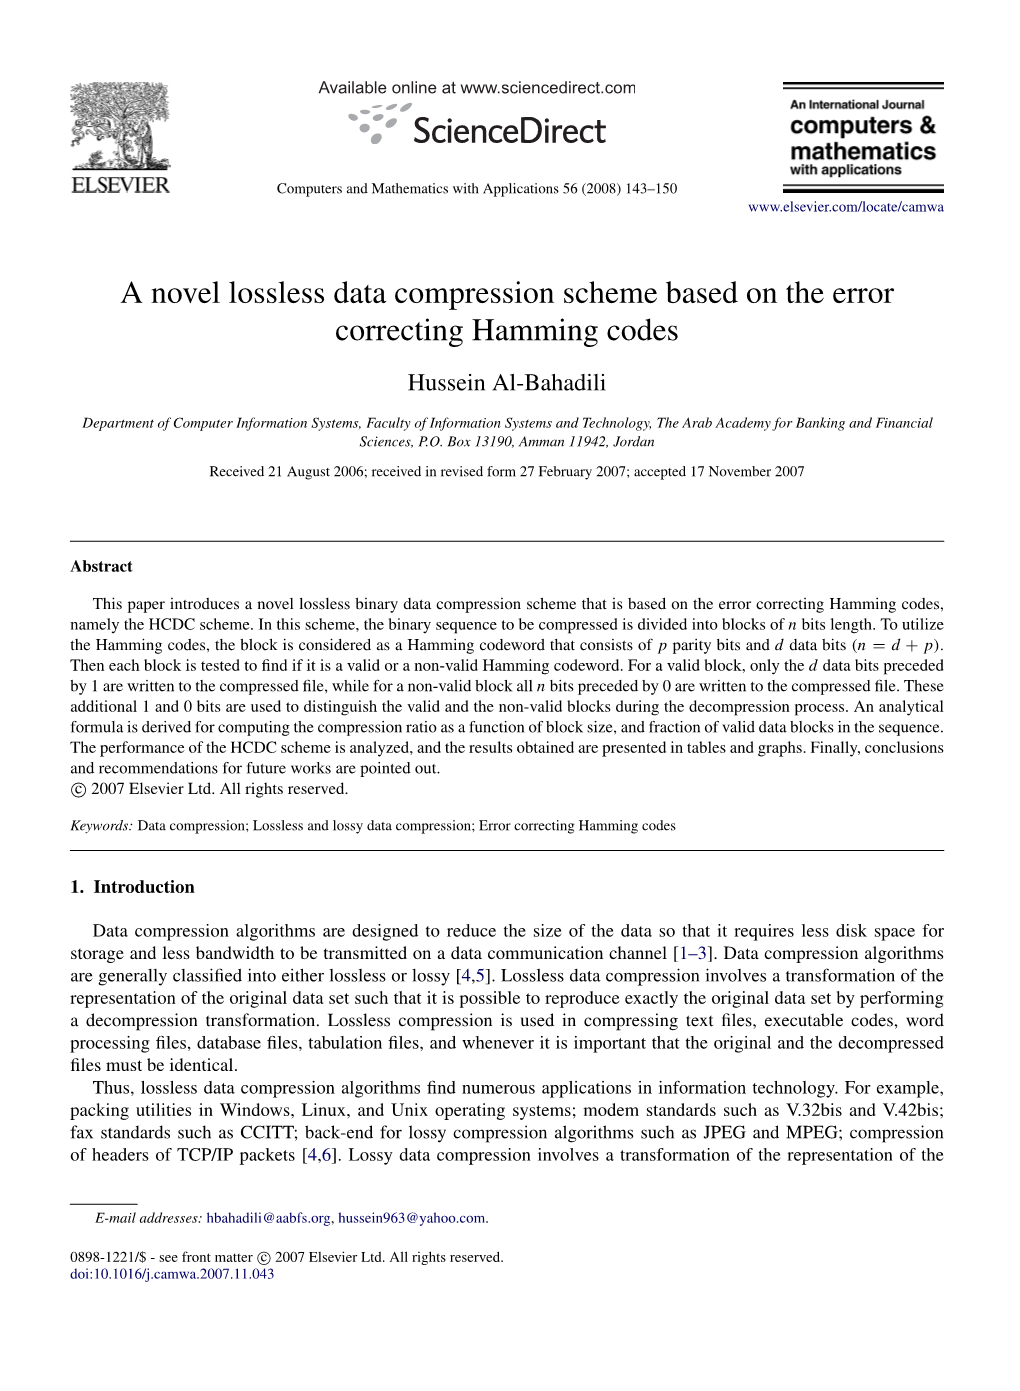 A Novel Lossless Data Compression Scheme Based on the Error Correcting Hamming Codes